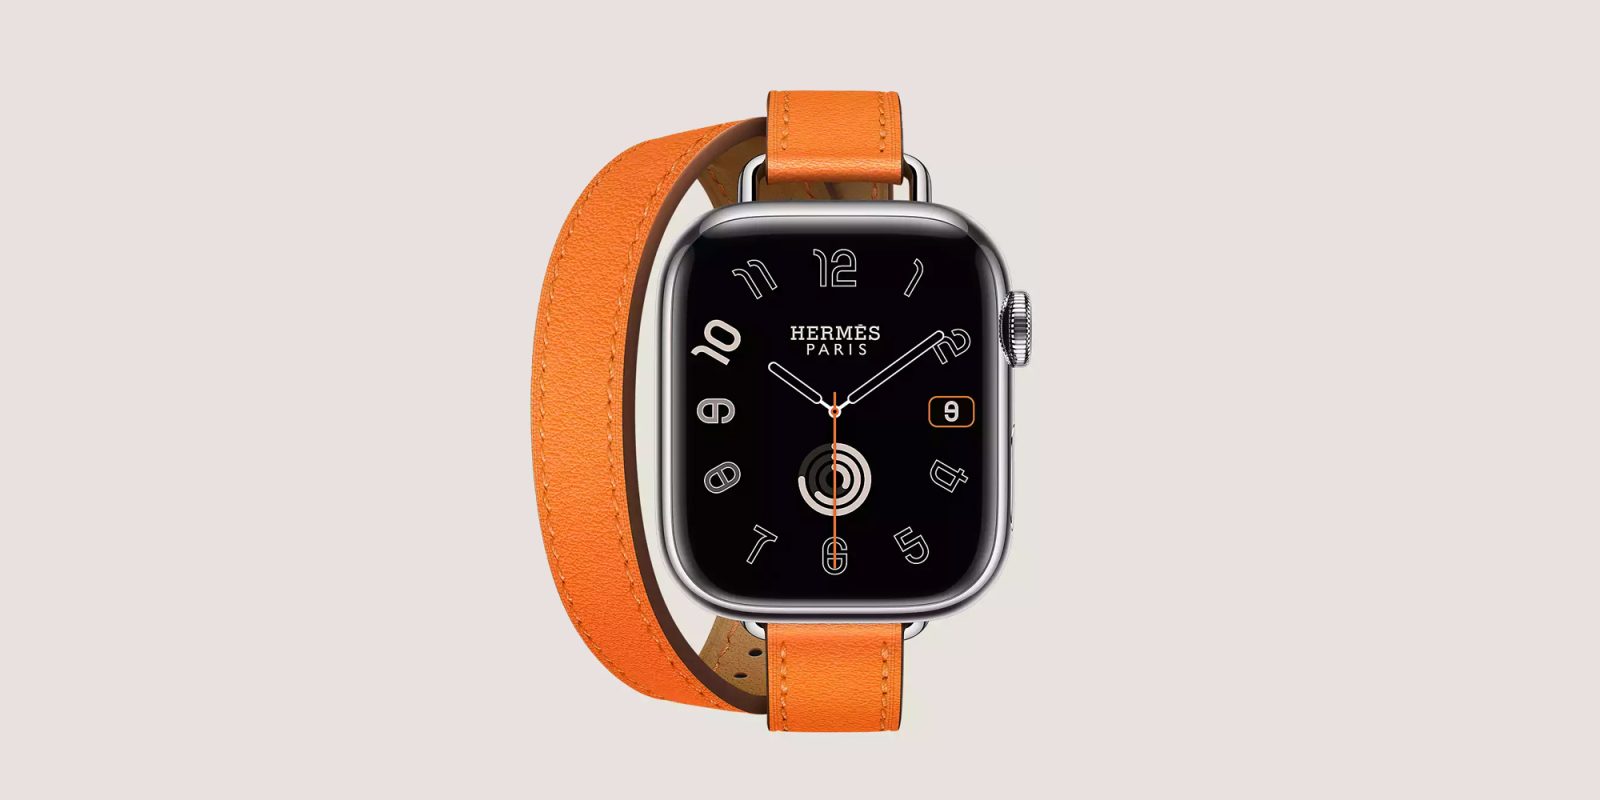 Hermès still offers Apple Watch Series 9 with leather bands in its online store